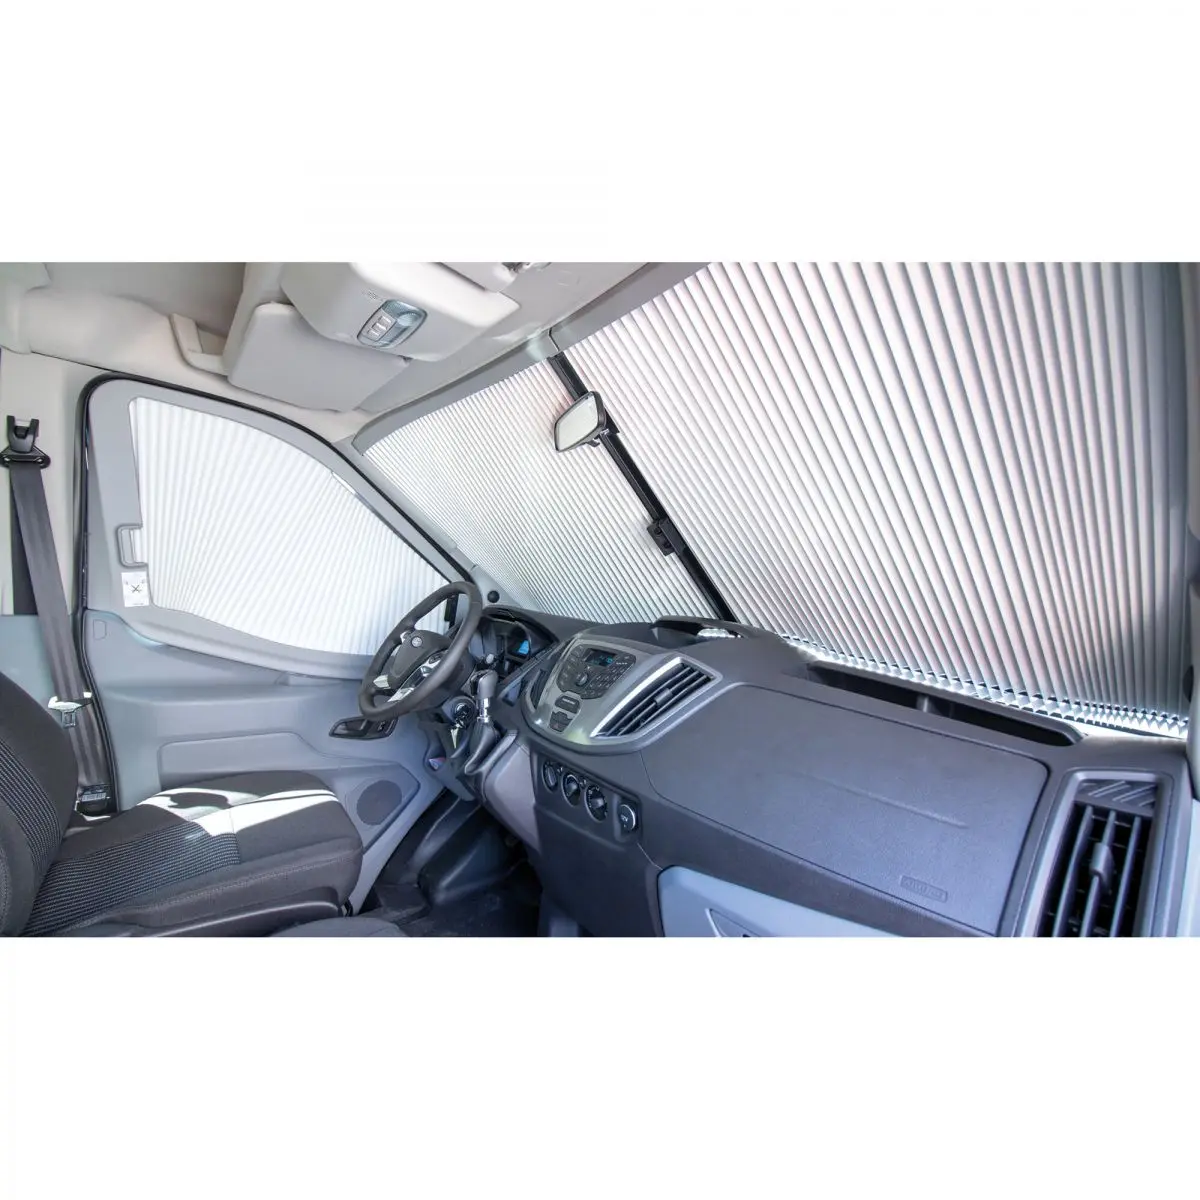 Nuanțare geam lateral REMIfront pentru Ford Transit anul 2014/05 - 2019/06